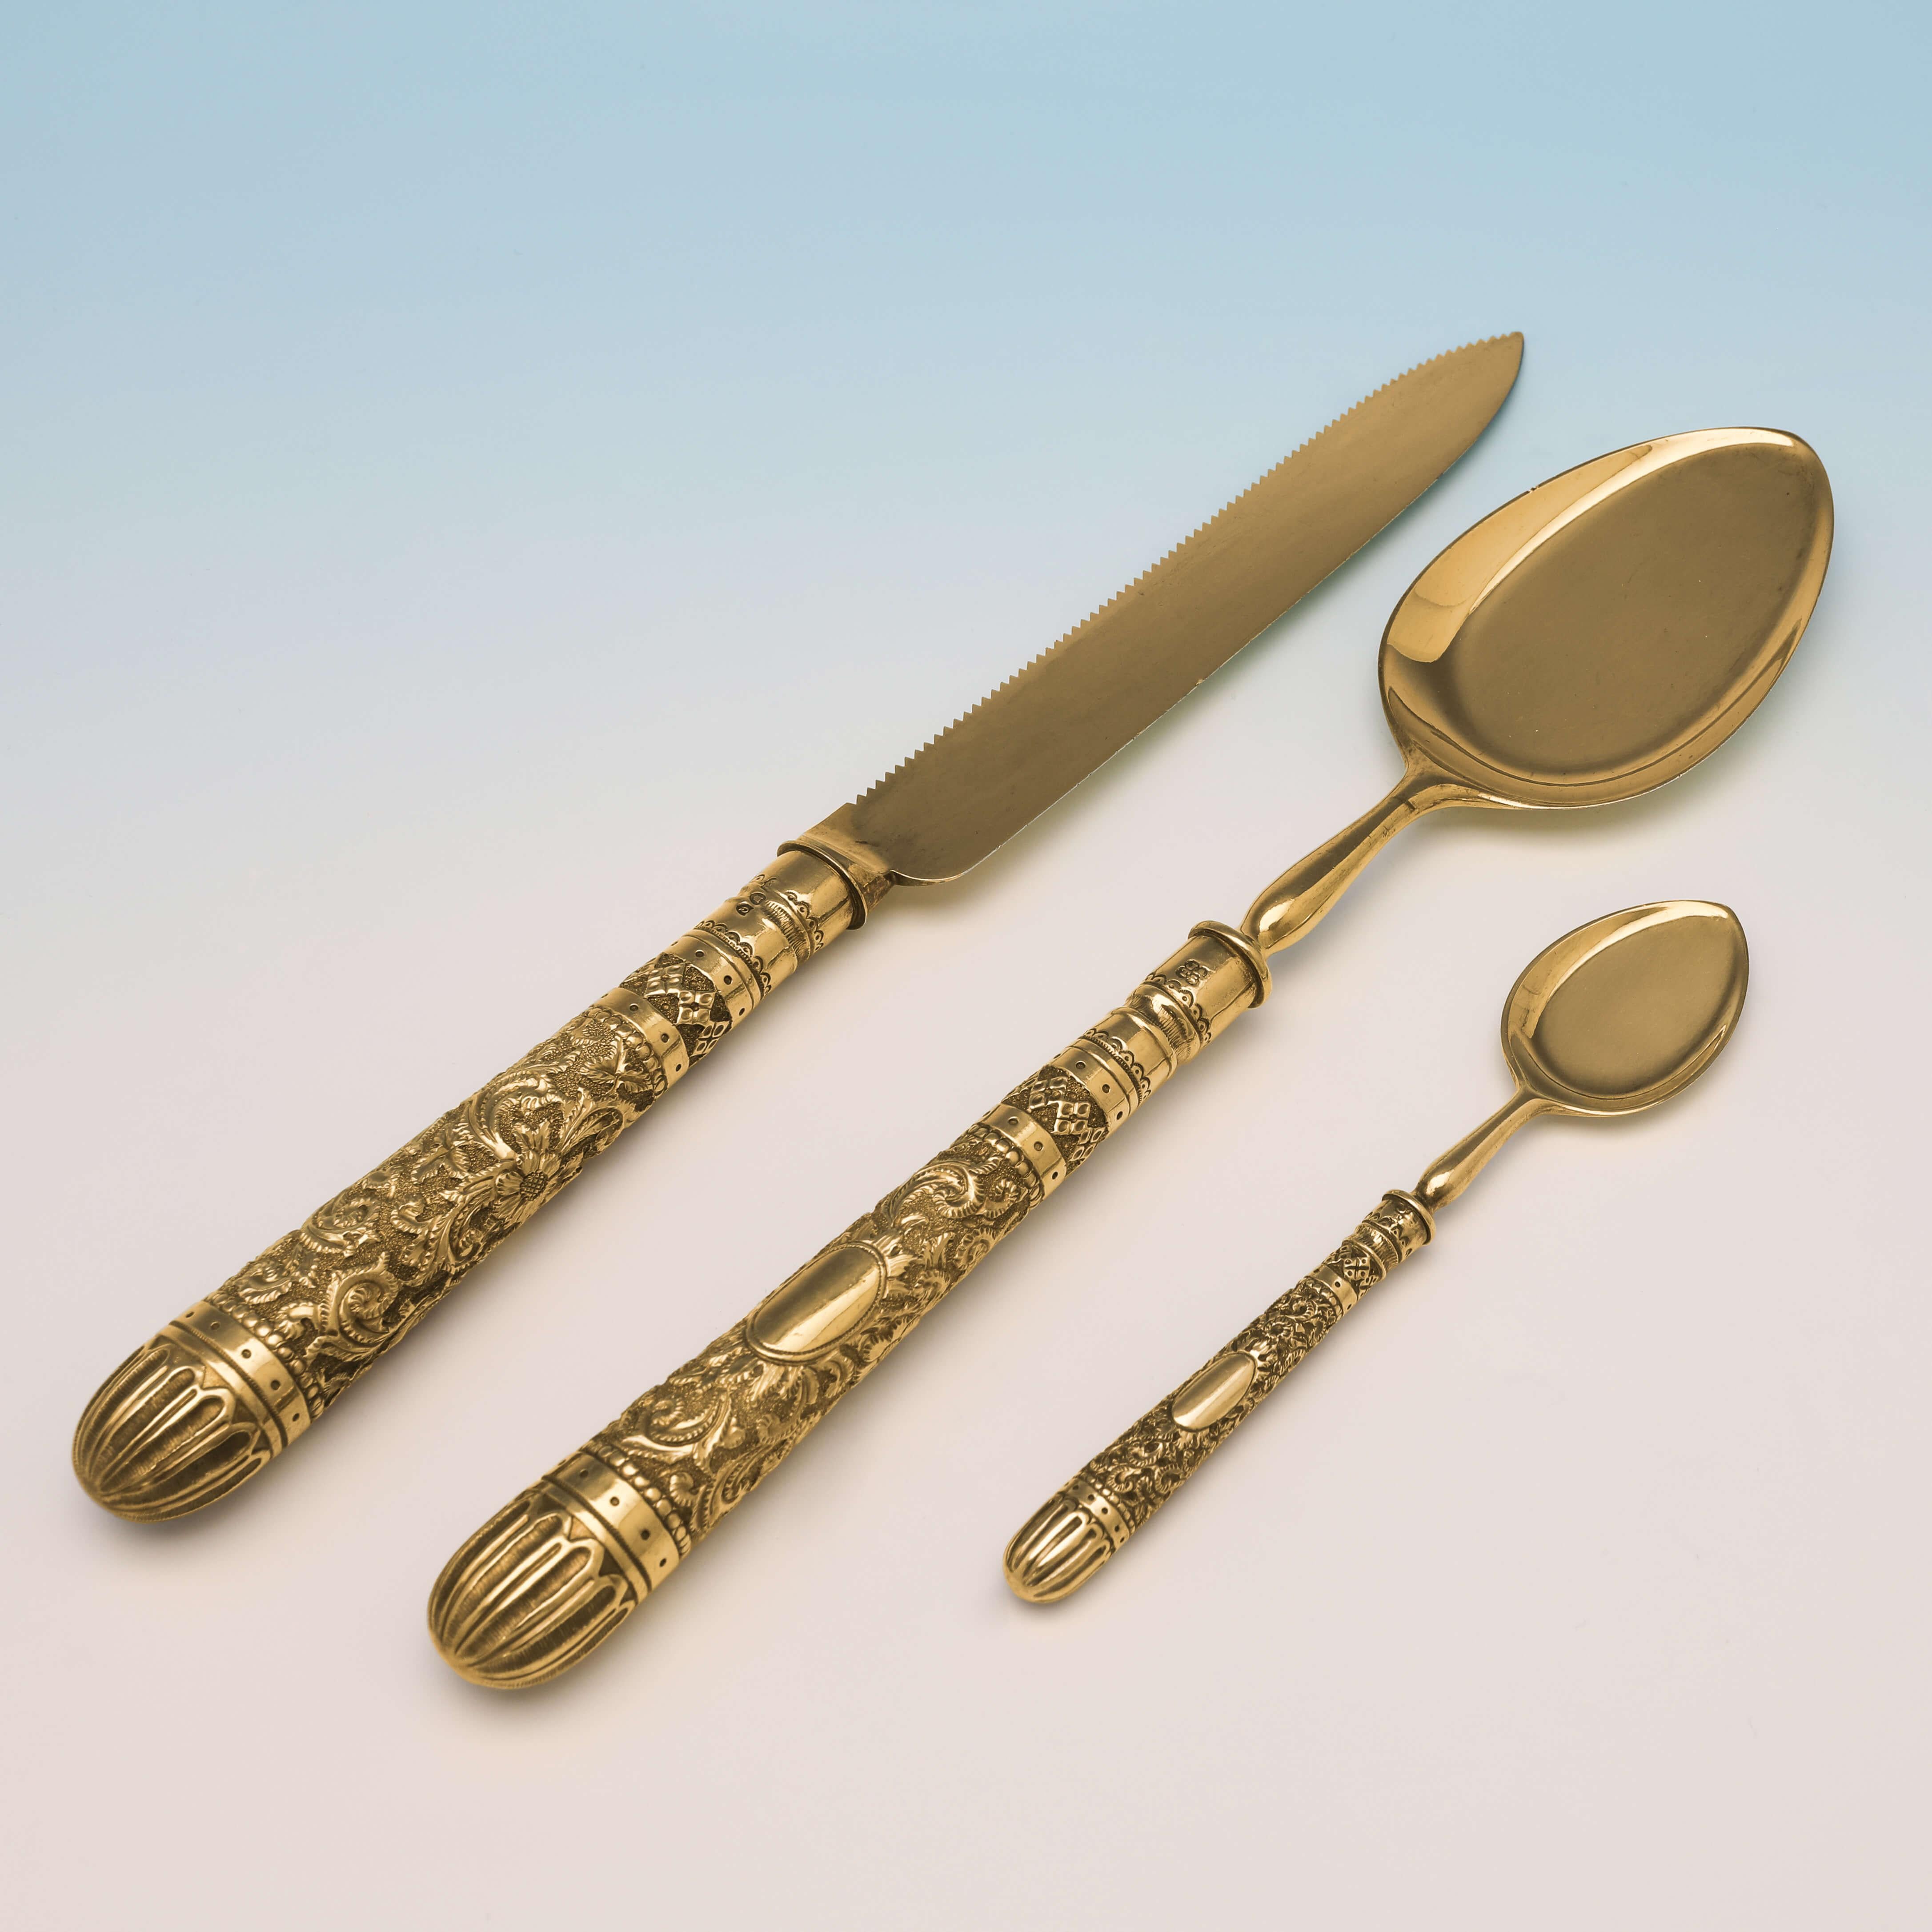 Hallmarked in London in 1881 by Aldwinckle & Slater, this very attractive, Victorian Antique Sterling Silver Set of Ice Cream Spoons Is presented in the original box along with a serving spoon and serrated cake knife, all ornate in design, and gold